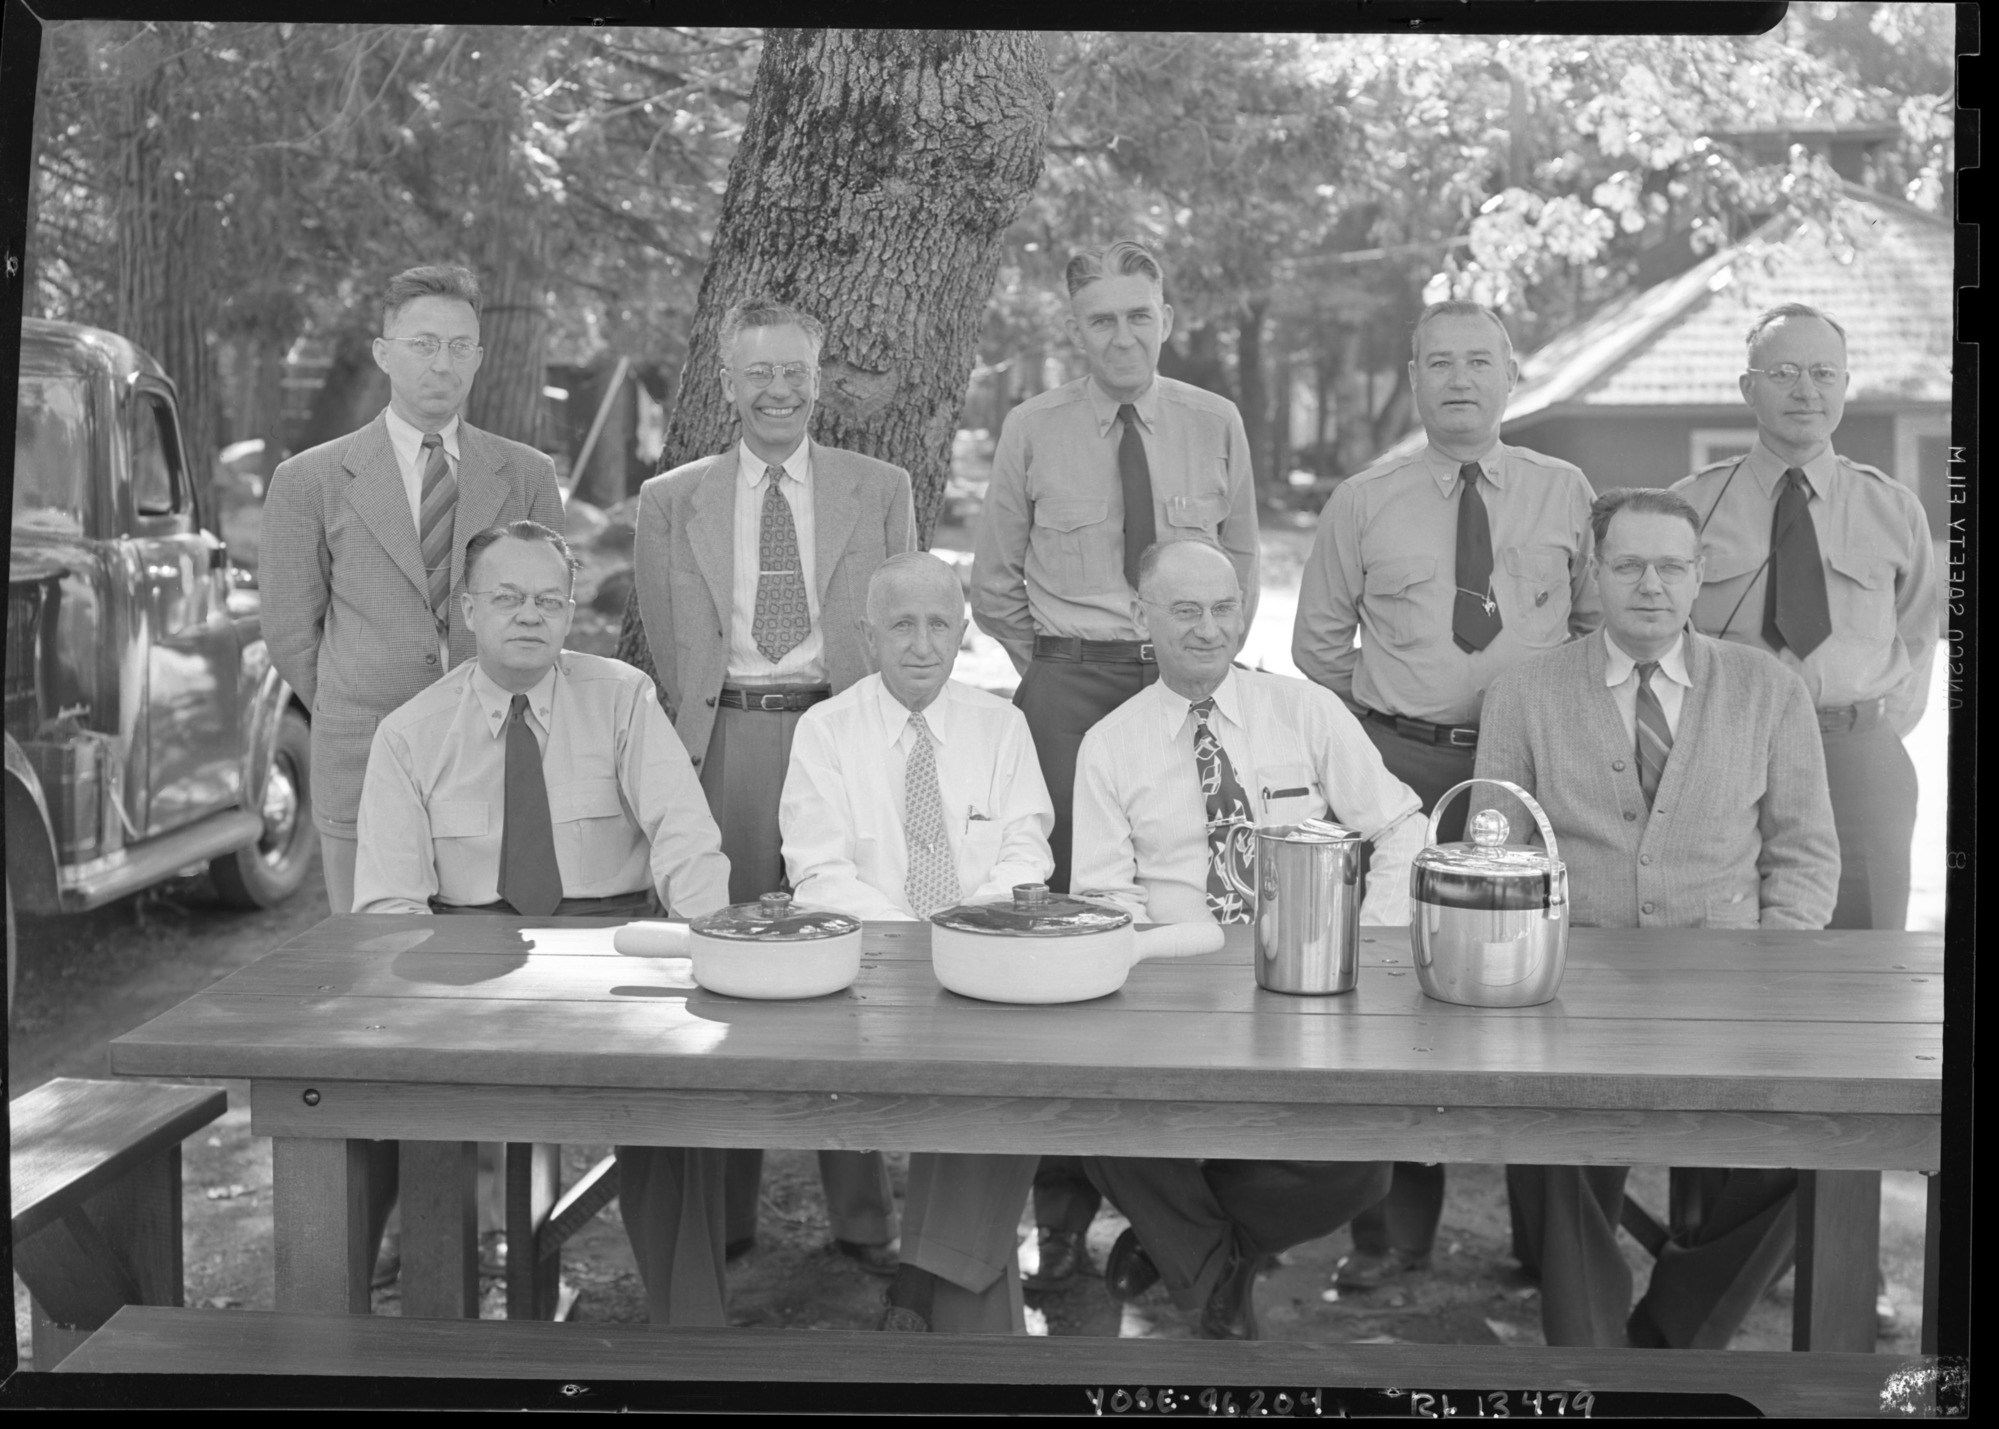 Members of Park Staff on occasion of Frank B. Ewing's retirement. Behind table (L to R): Carl P. Russell, Frank B. Ewing, William J. Ellis, and Emil F. Ernst. Standing: E. Carlton Smith, Charles F. Hill, Oscar A. Sedergren, John B. Wosky, and Ralph H. Anderson.